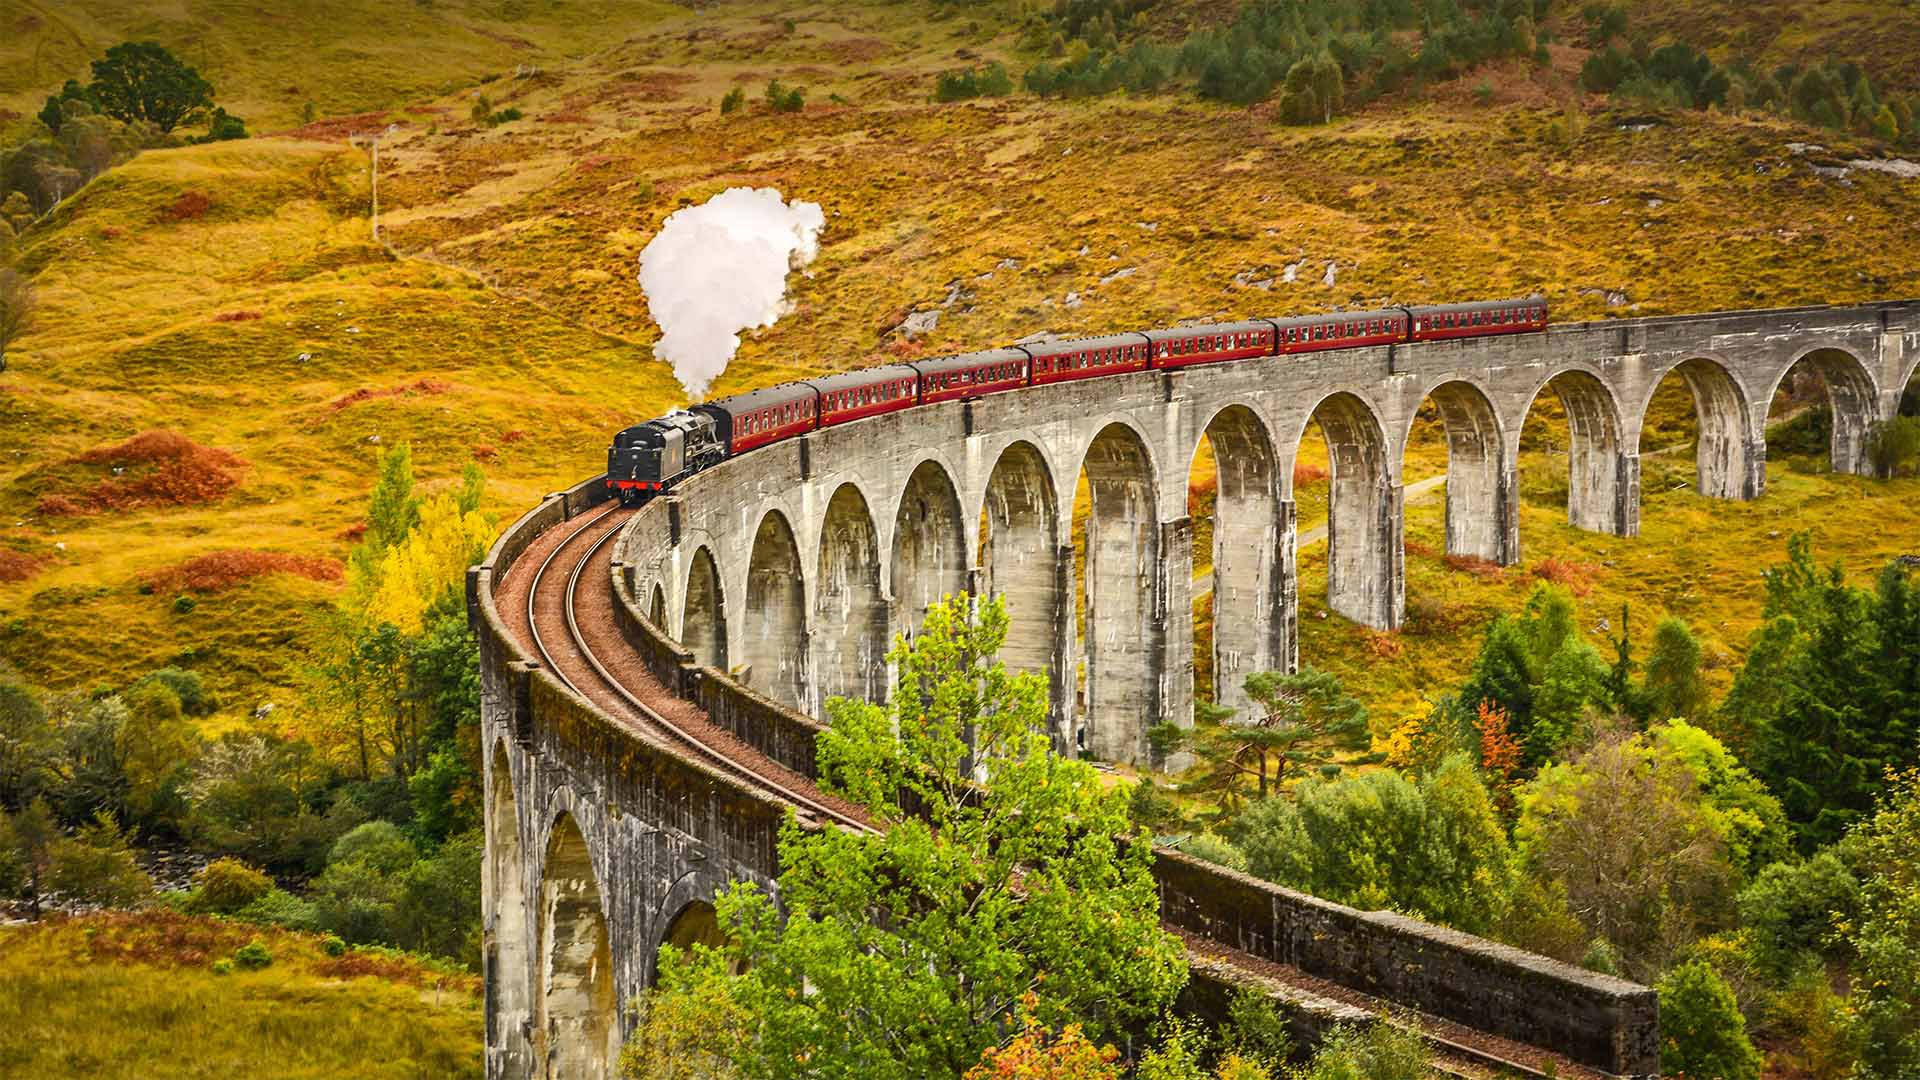 The Jacobite steam train crossing the Glenfinnan Viaduct in Inverness-shire, Scotland - The Escape of Malee/Shutterstock)